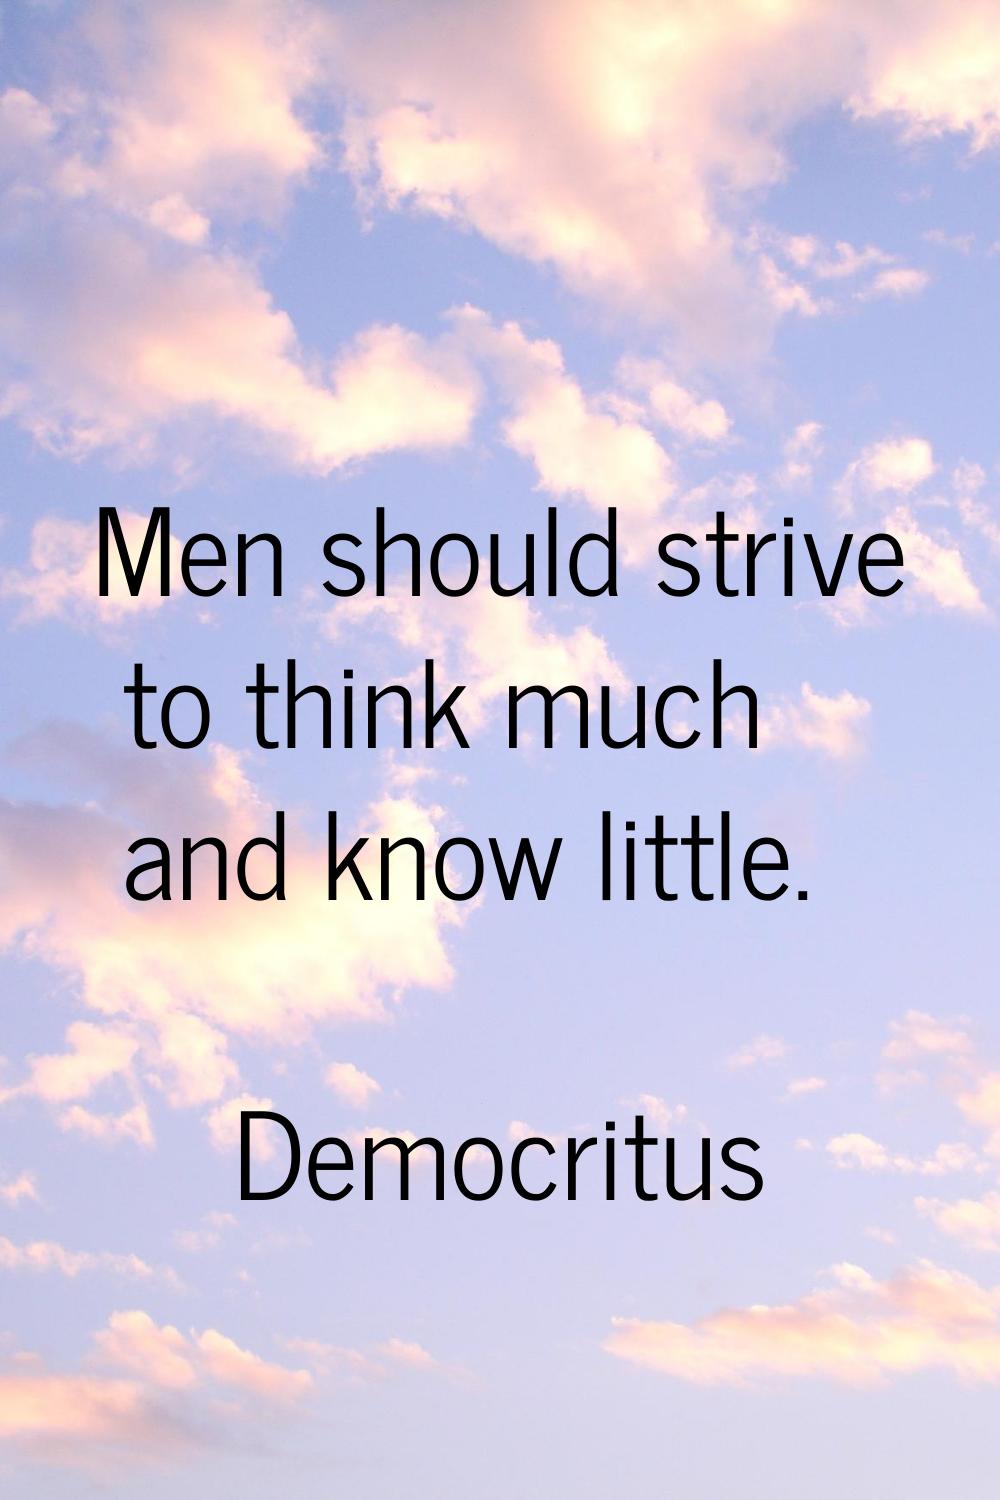 Men should strive to think much and know little.